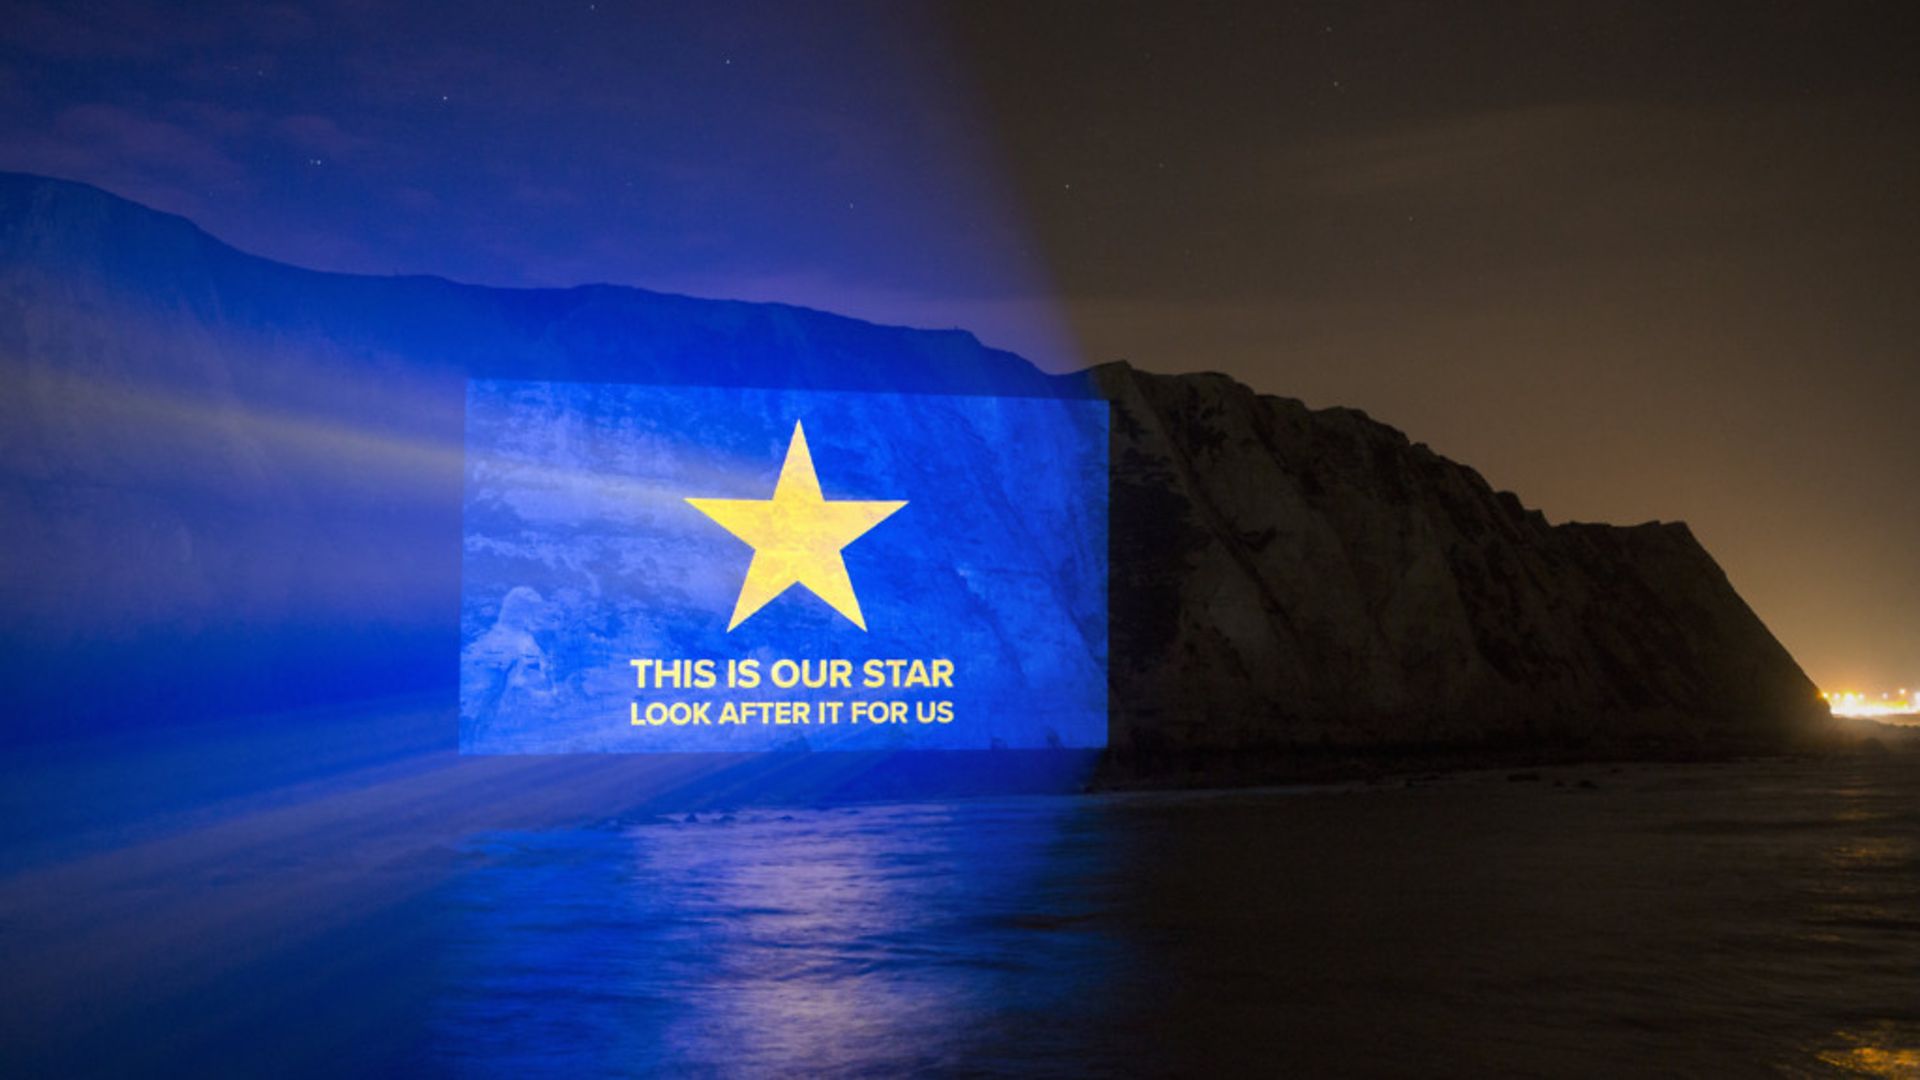 Led By Donkeys project a message to Europe on the side of the White Cliffs of Dover. - Credit: Led By Donkeys/Twitter